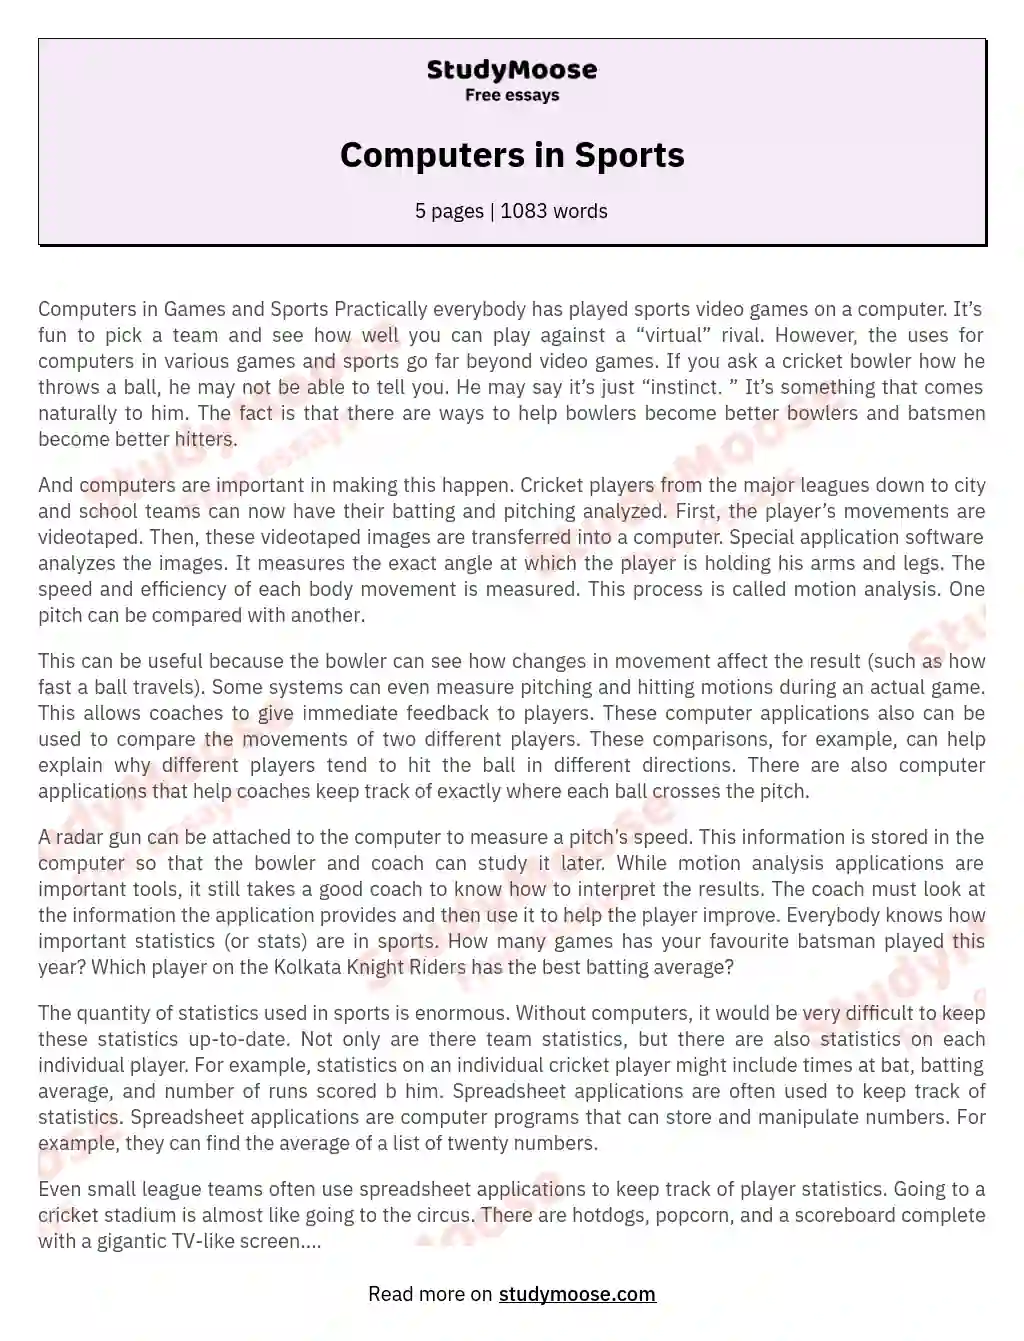 Computers in Sports essay